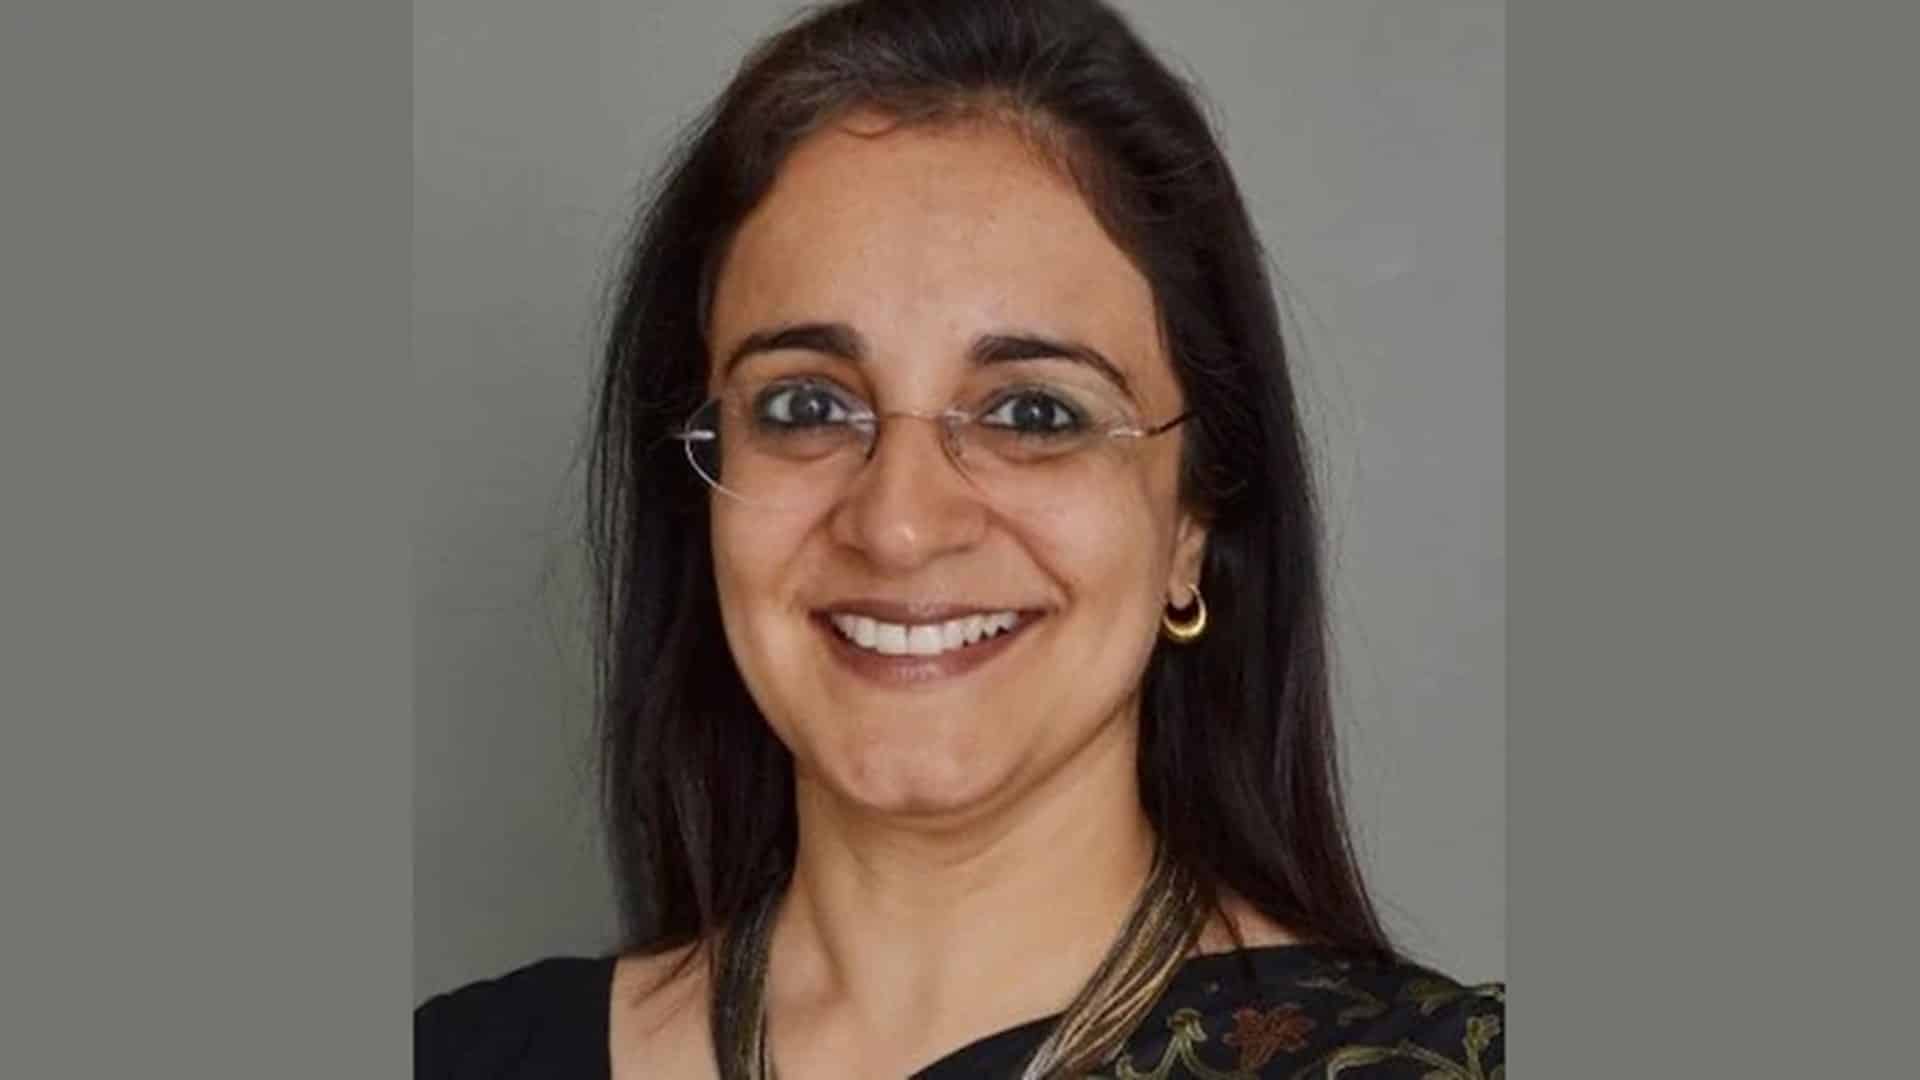 SEBI appoints Madhabi Puri Buch as its first woman chairperson